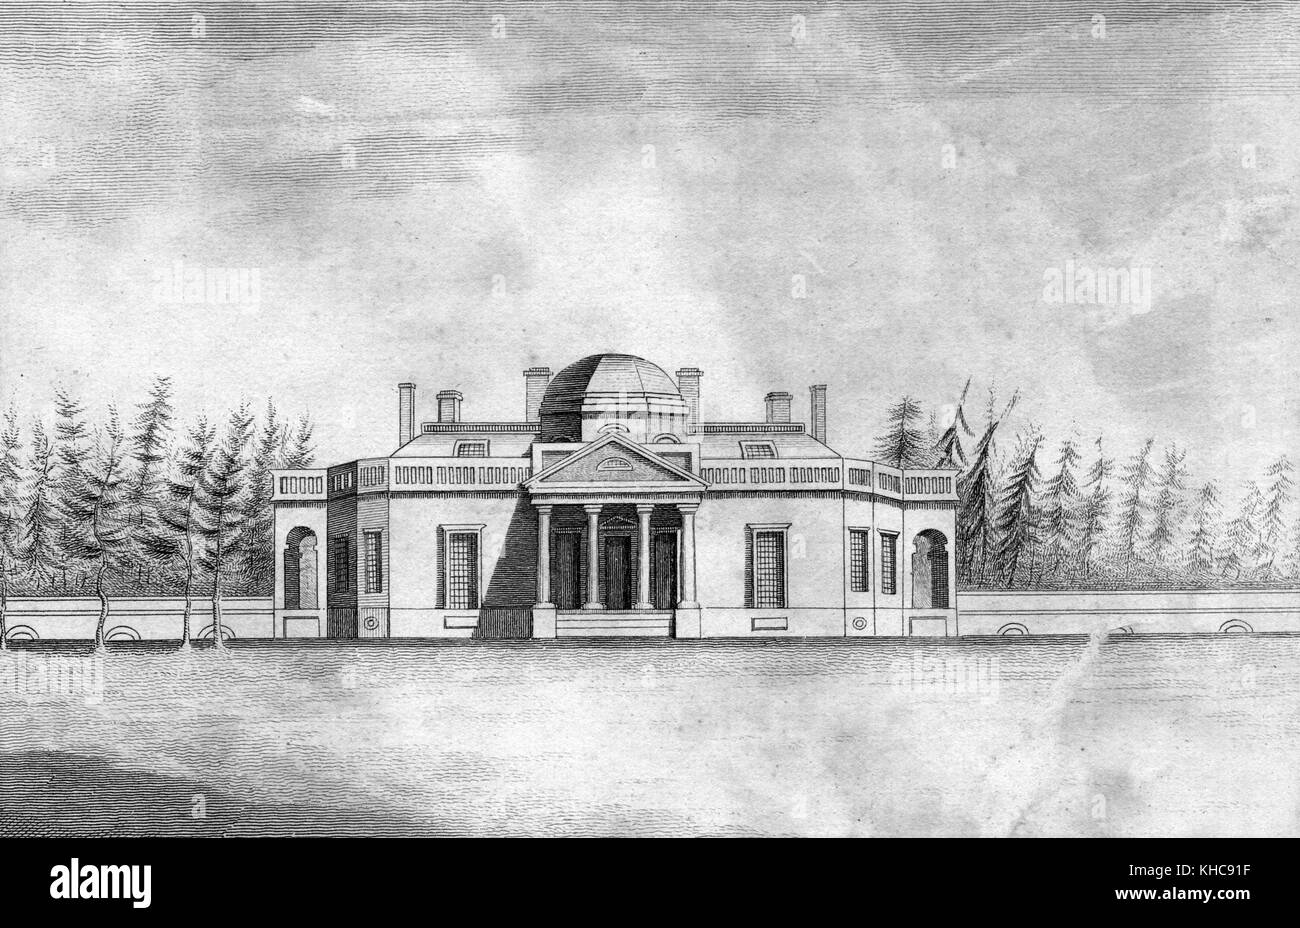 Engraving from a painting of Monticello, the main house on the primary plantation of Thomas Jefferson, designated as a National Historic Landmark in 1960, Albemarle County, Virginia, 1820. From the New York Public Library. Stock Photo